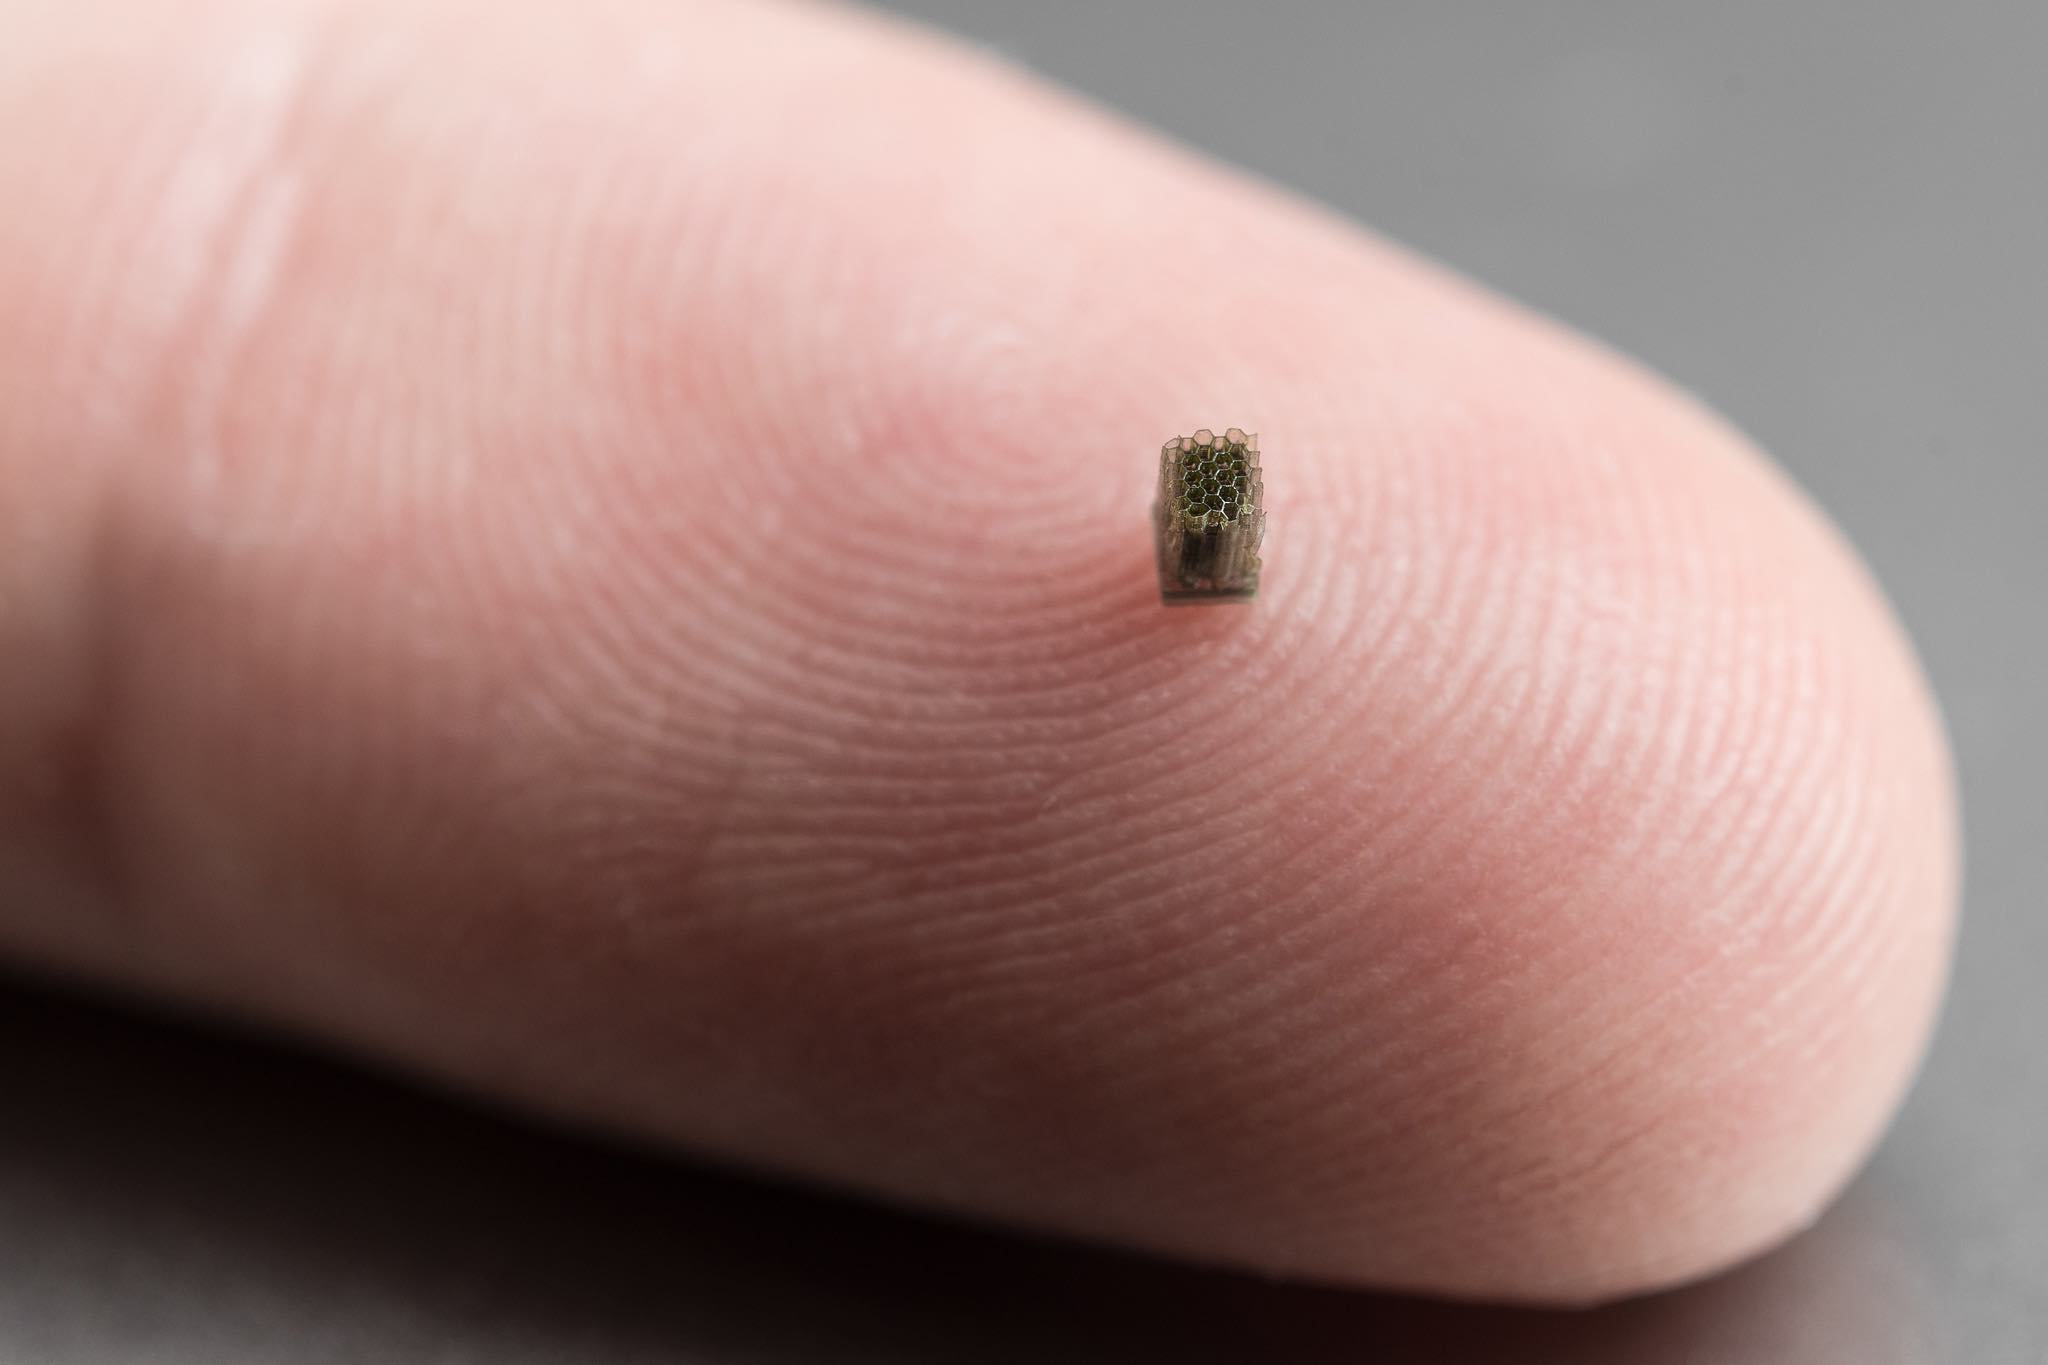 A micro honeycomb structure in PP, with wall thicknesses of ~20 microns over a height of a few mm. The part is made for a company that specializes in micro batteries. The ultra-high surface area is used to increase battery storage with minimal footprint. Part size 1.6 x 1.8 x 2.3 mm3, print time 80 minutes, and print layer 2 microns. Photo via Nanofabrica.